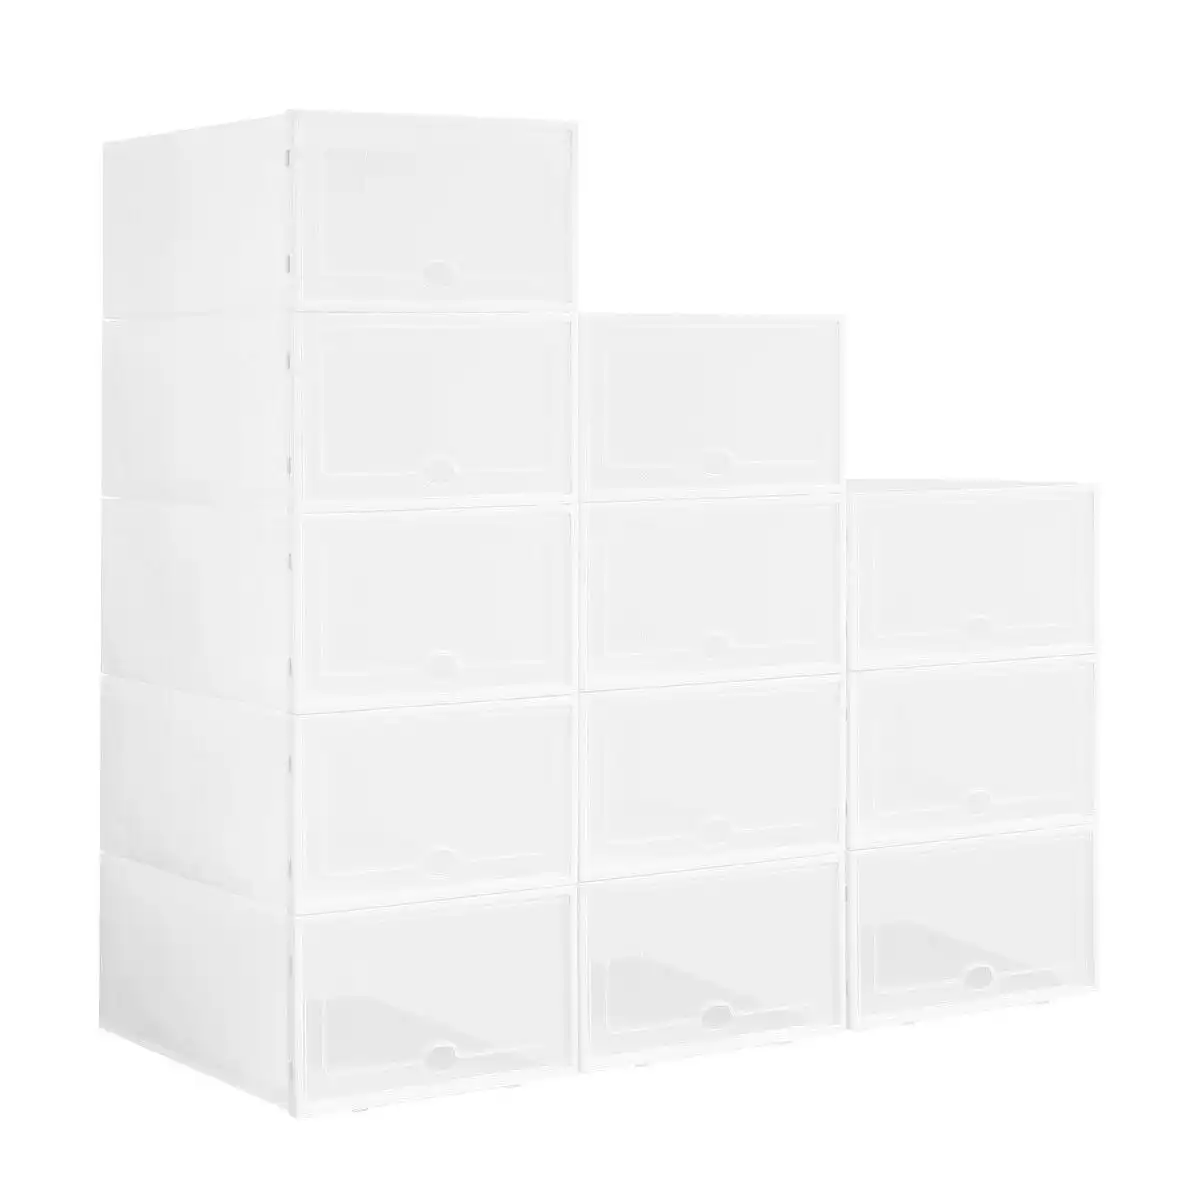 LUXSUITE 12PCS Plastic Shoe Boxes Stackable Organiser Large Storage Containers Drawers Sneaker Display Cases Bins Organizer Holder Unit with Clear Door